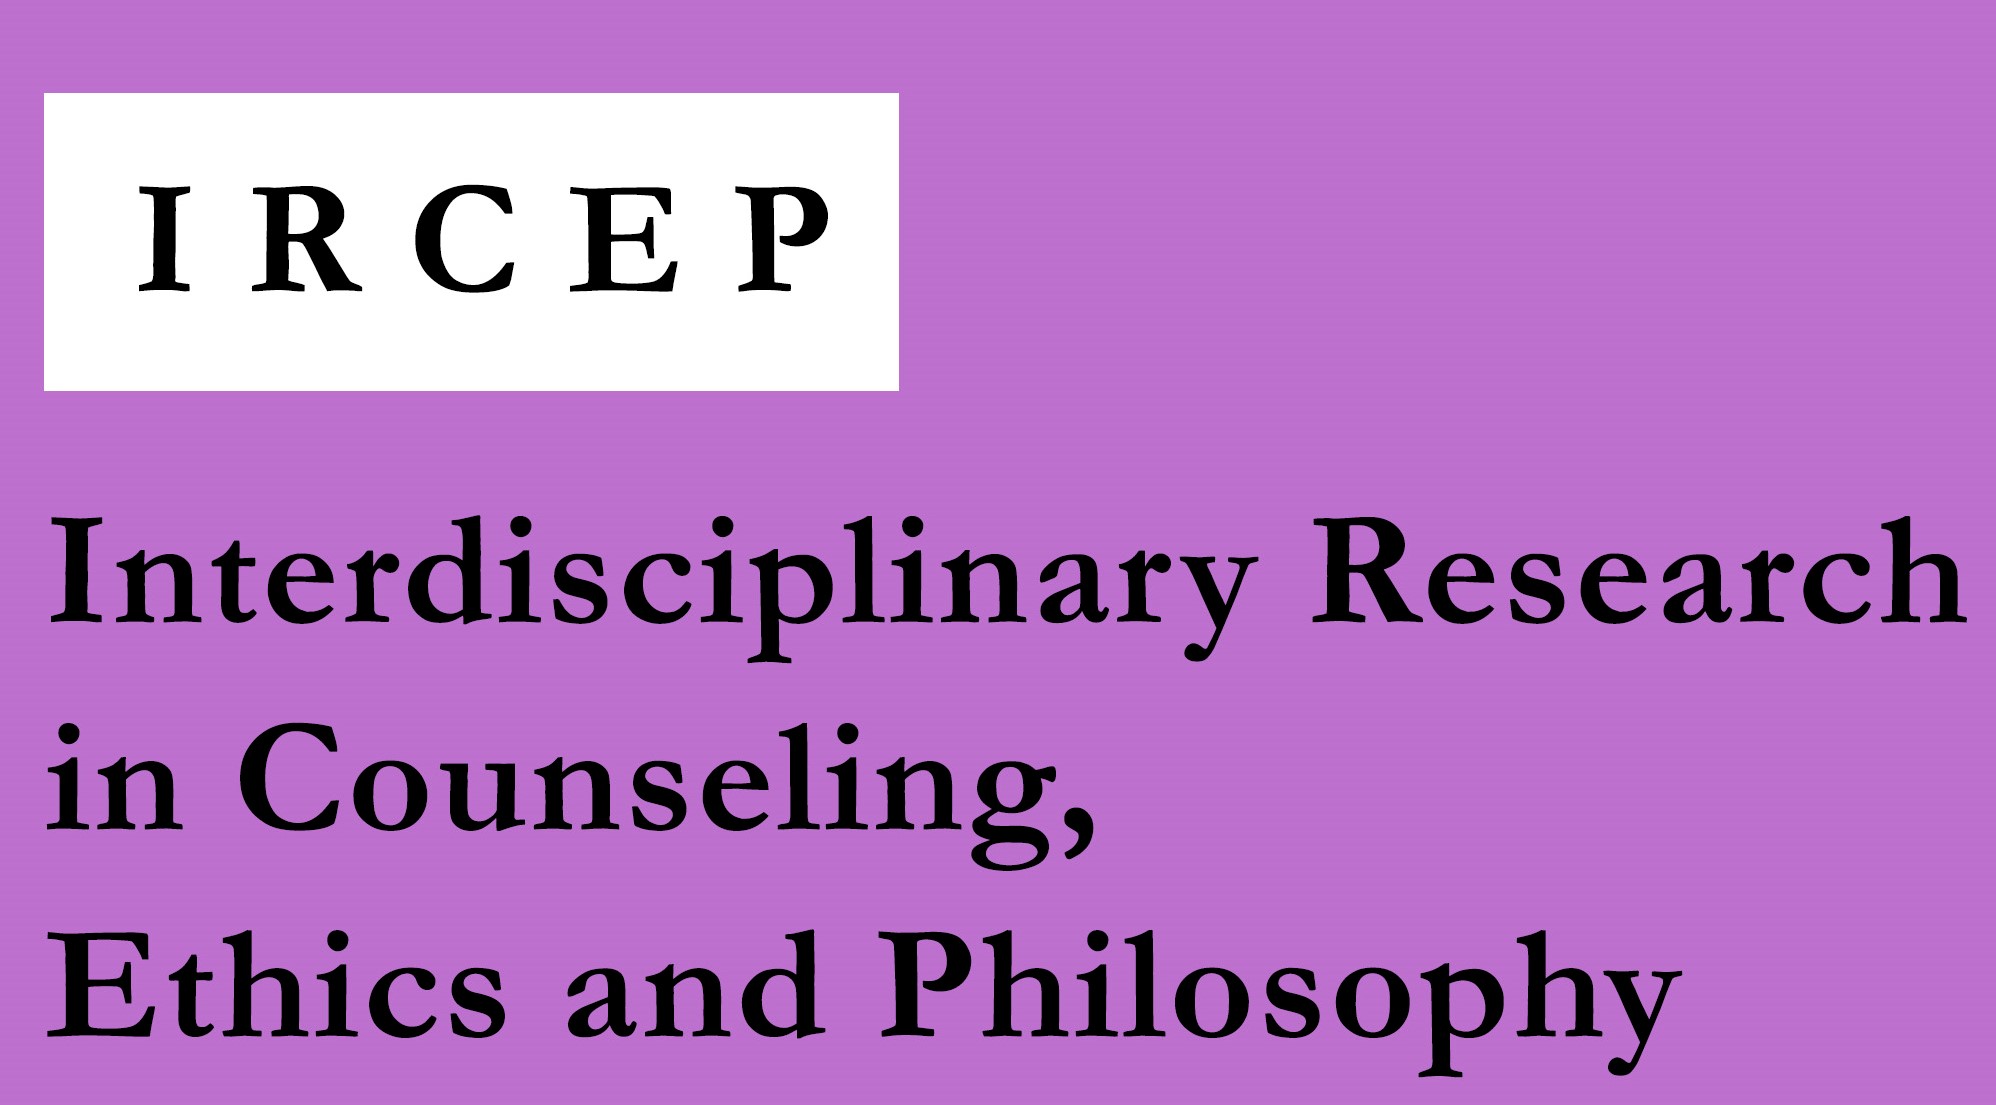 Interdisciplinary Research in Counseling, Ethics and Philosophy